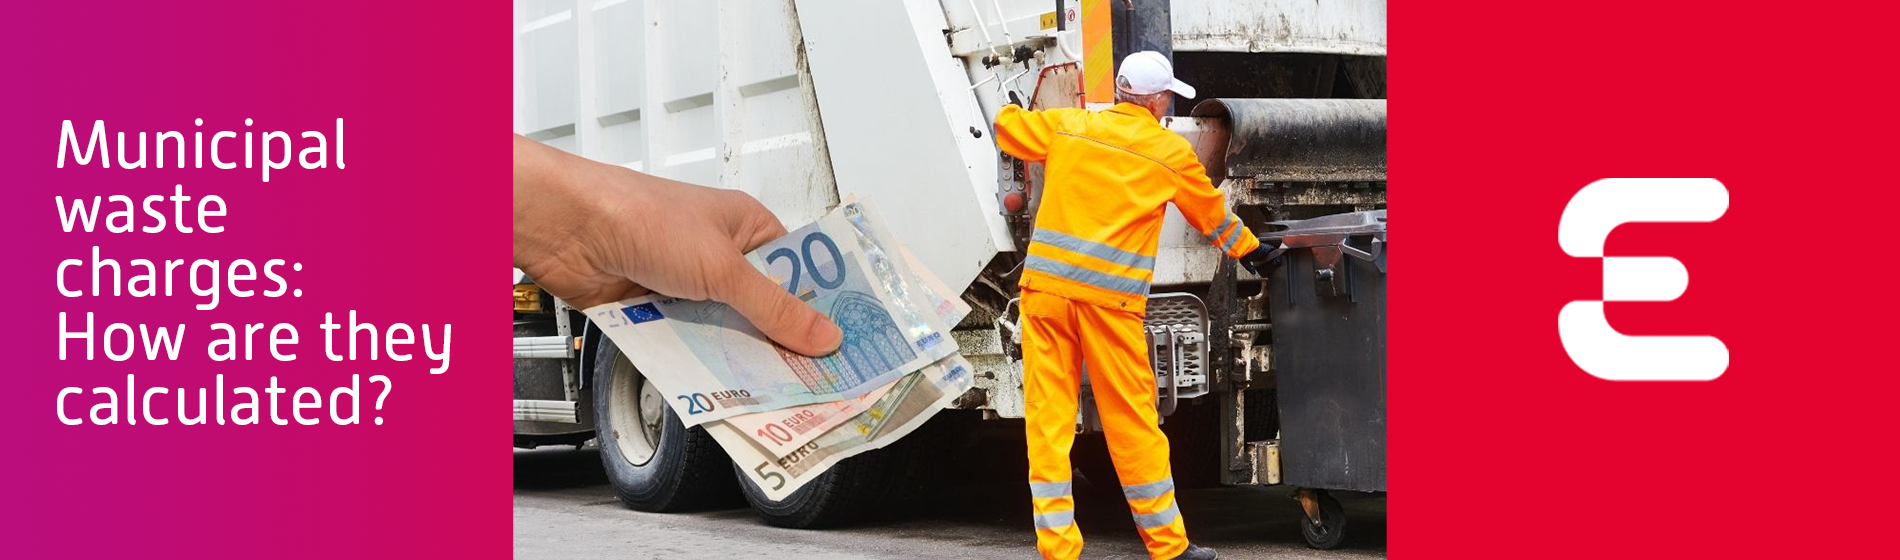 Municipal waste charges: How are they calculated?